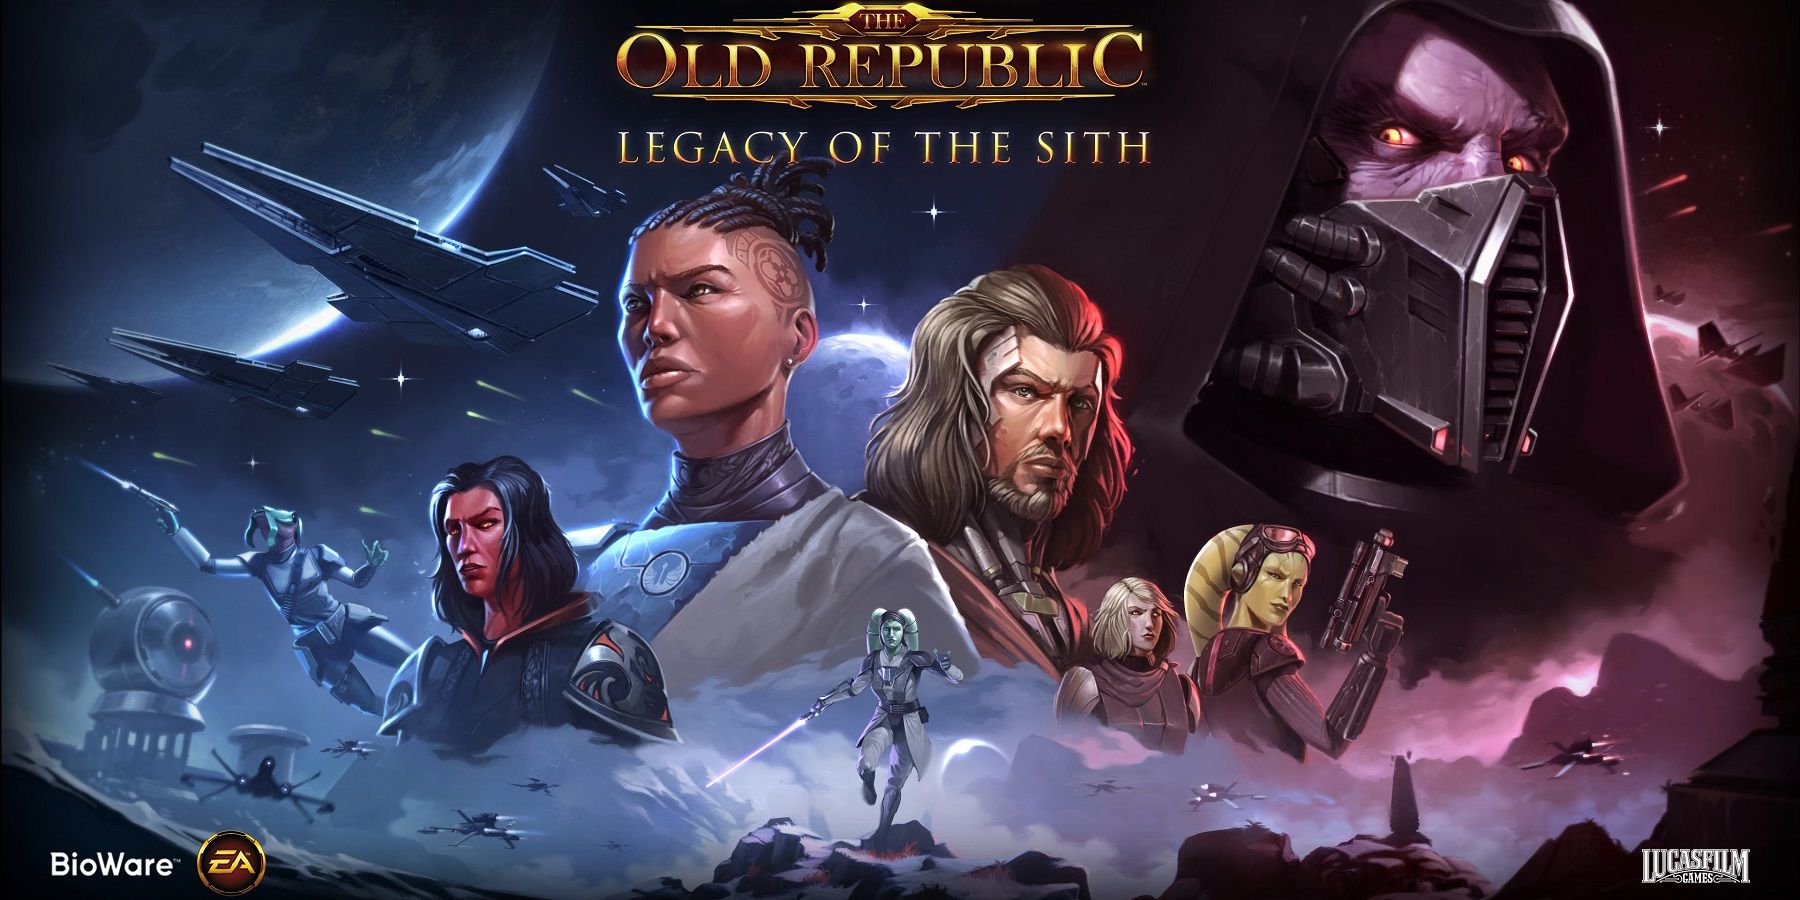 star wars the old republic free to play character slots